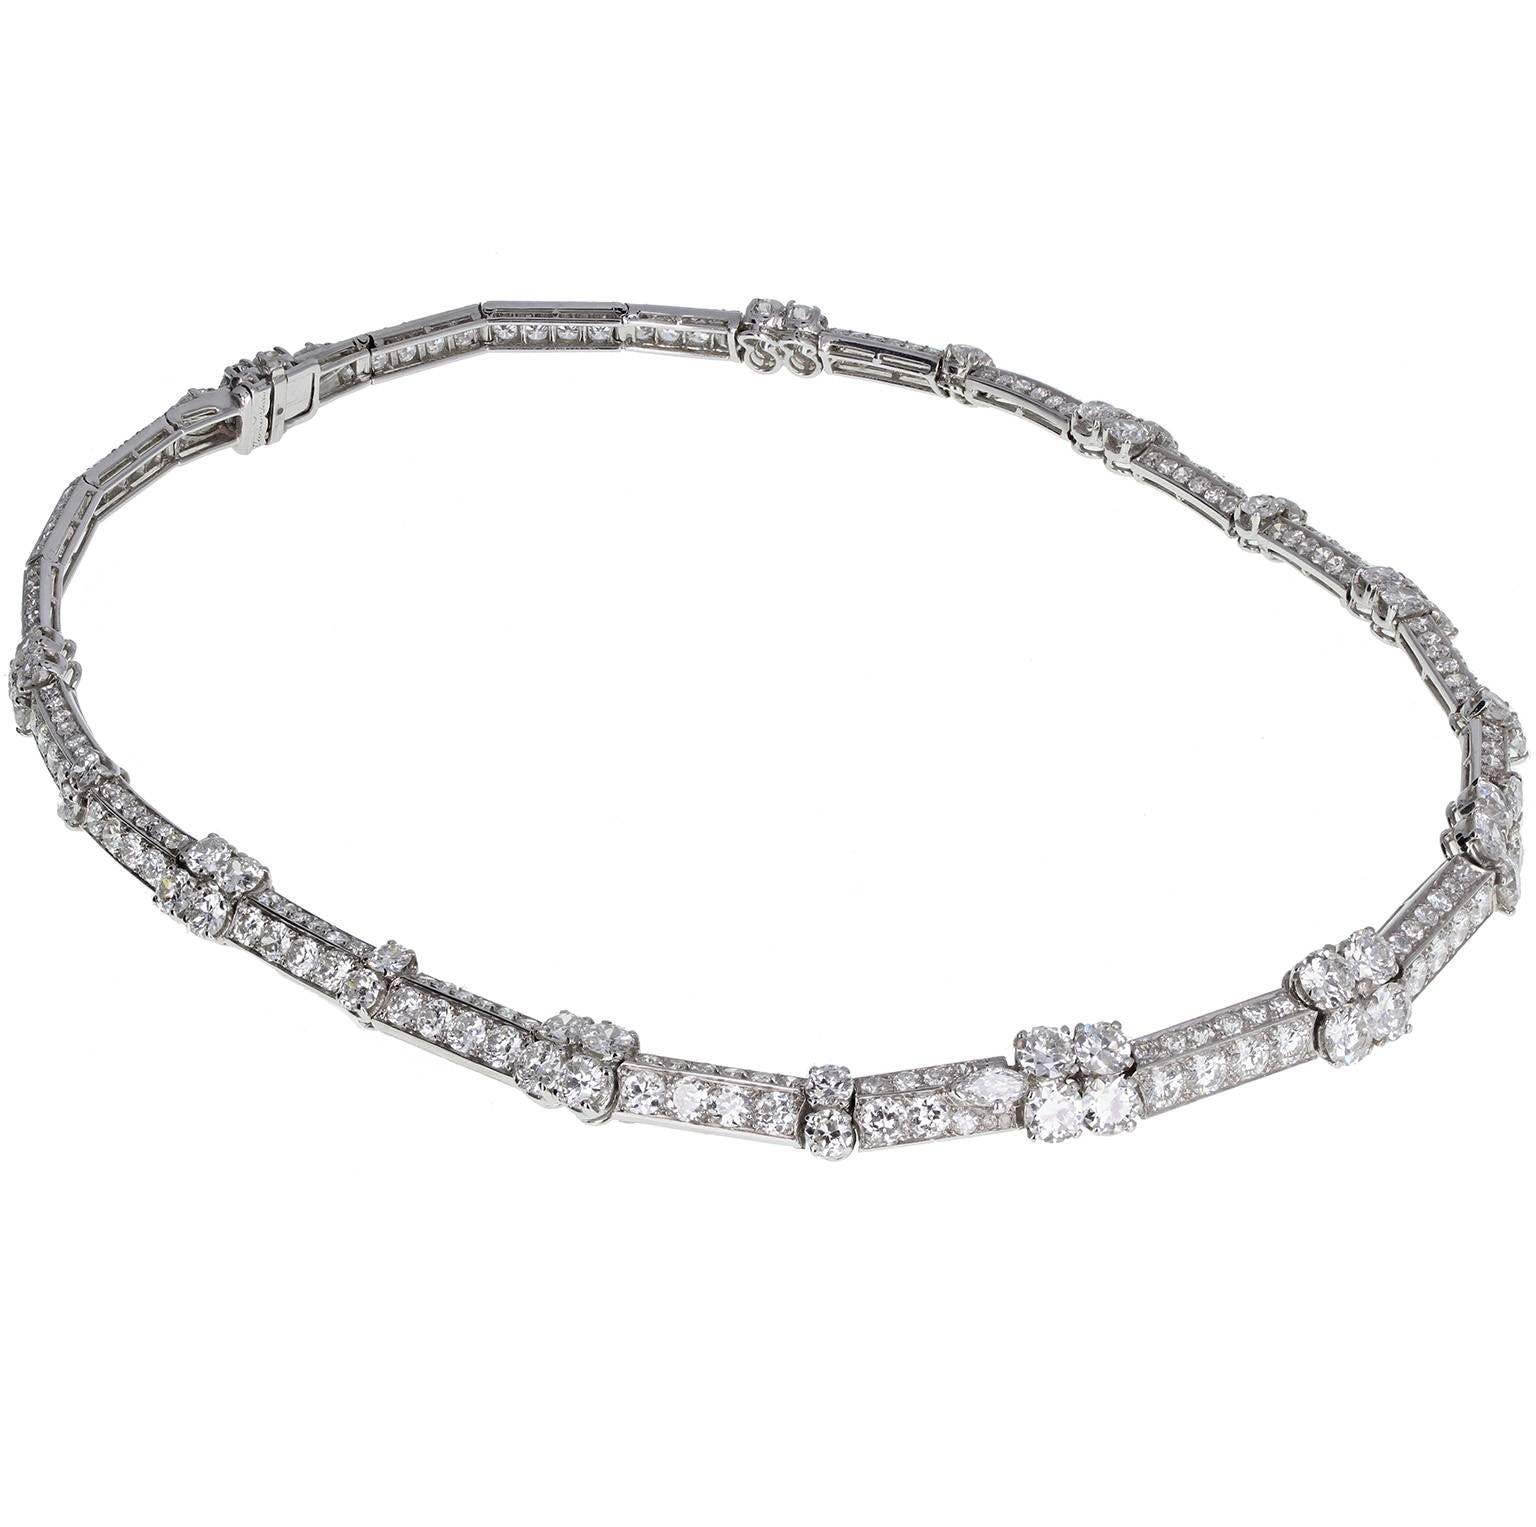 An exquisite quality 1930s necklace by Cartier Paris. Brilliant-cut diamonds arranged in groups of four and two, set between pavé set diamond bars. Diamond set clasp with marquise-cut diamonds. High quality and well matched diamonds, as would be